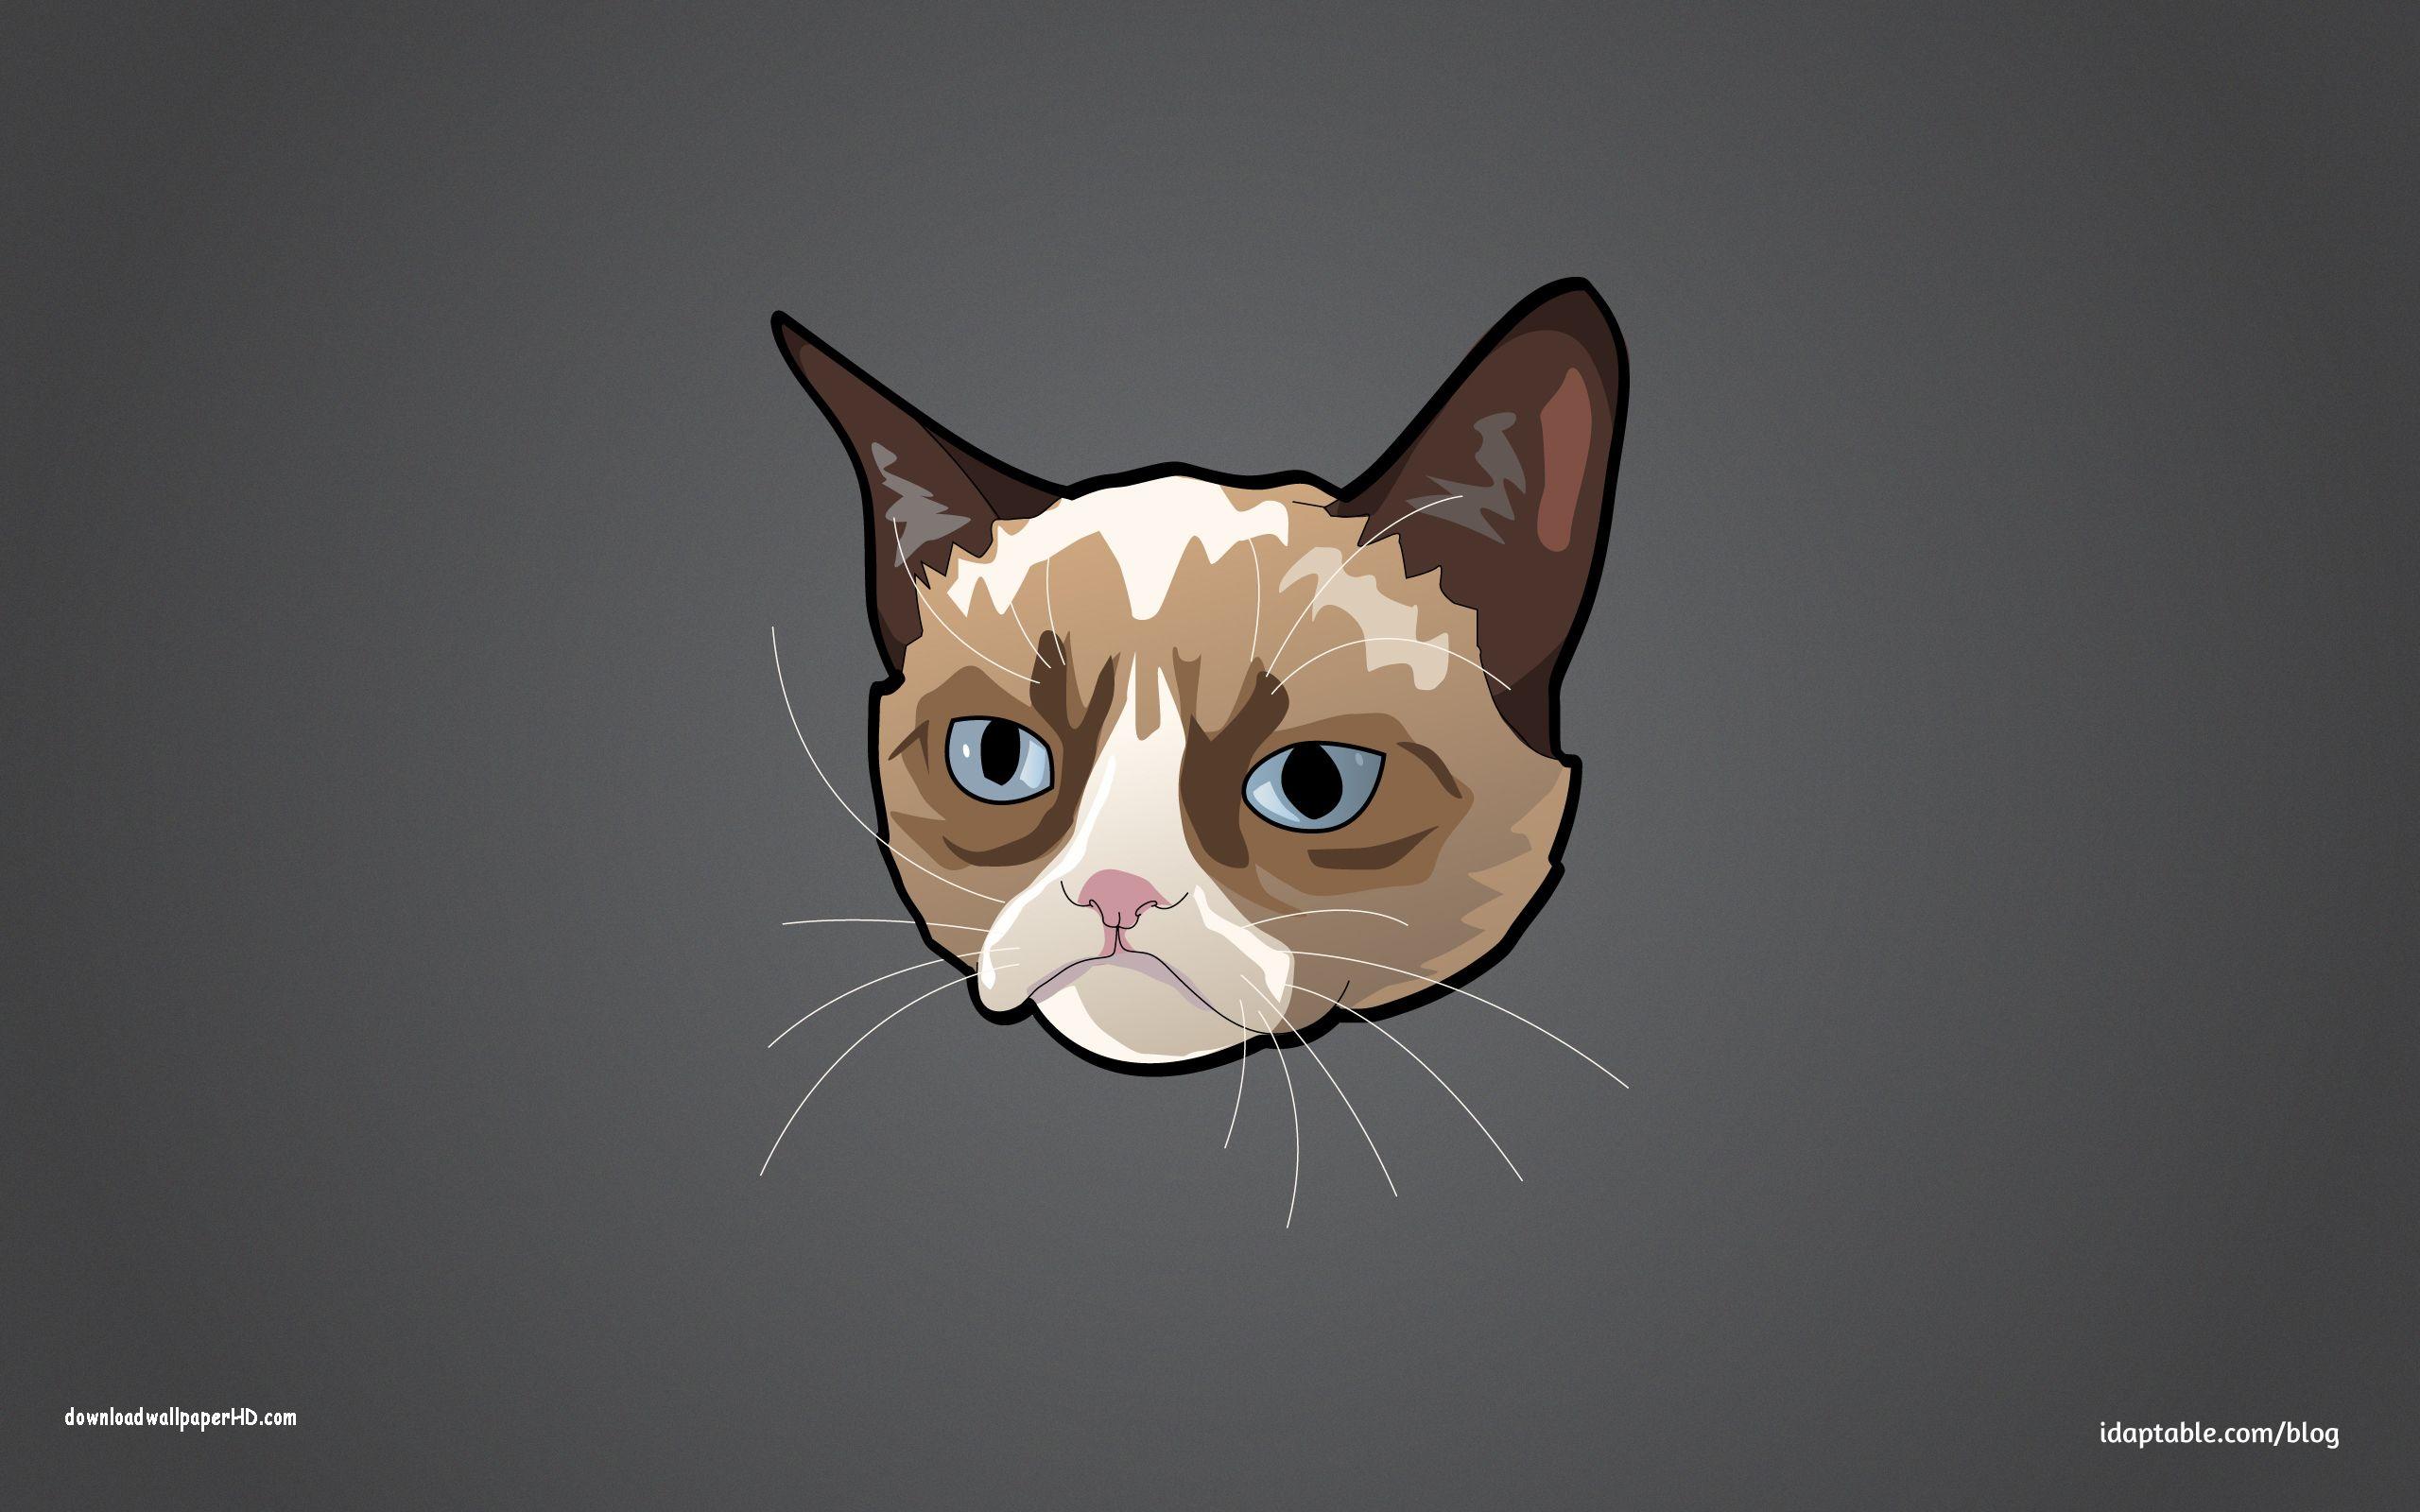 Angry Cute Cat wallpaper by border_100 - Download on ZEDGE™